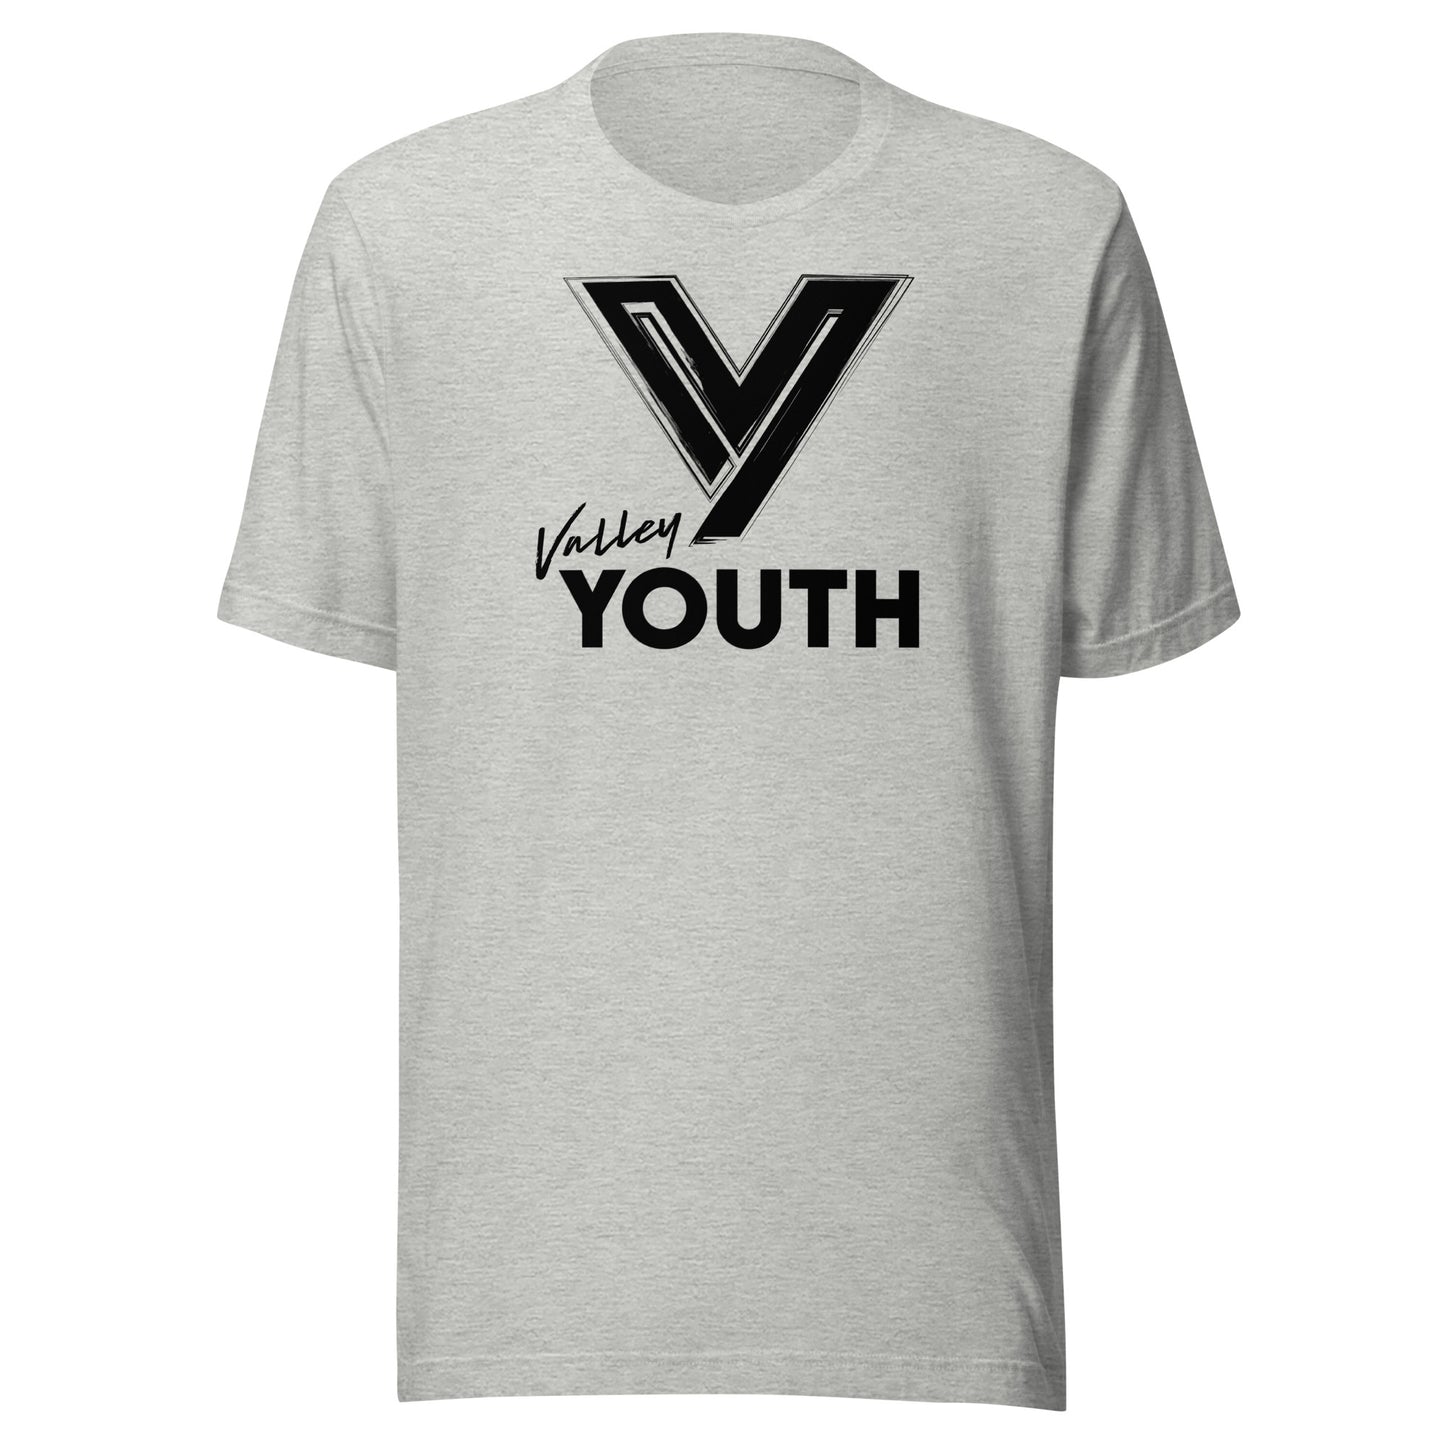 Youth // Unisex Short Sleeve T-Shirt - DARK ...more color options